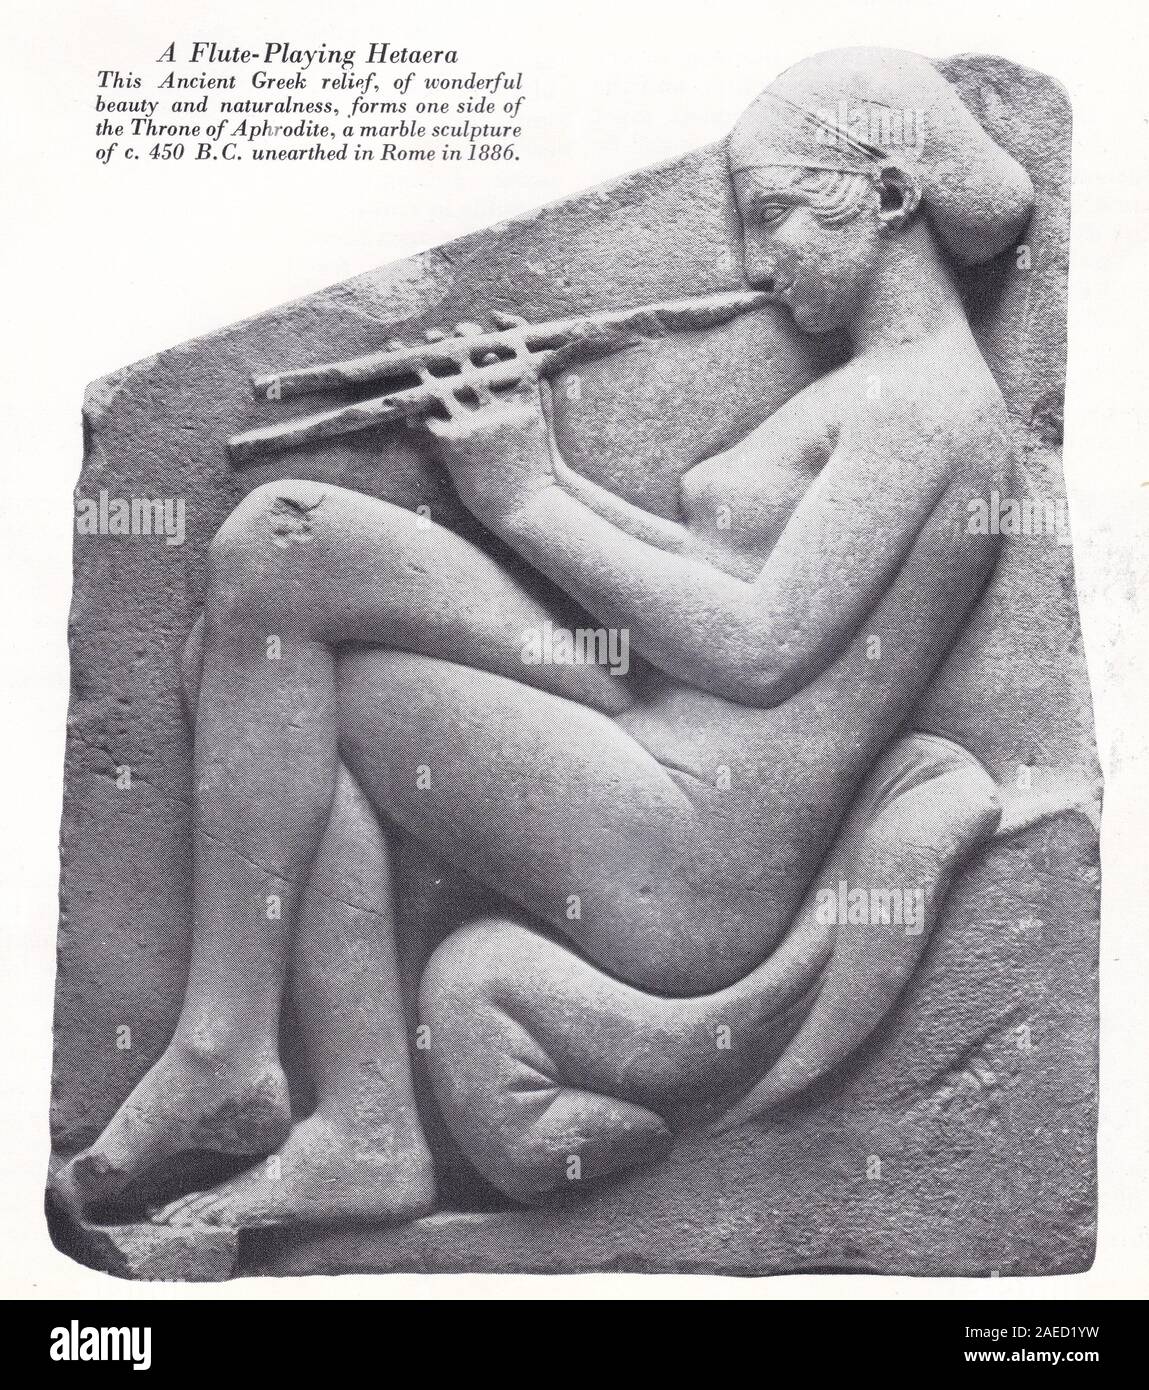 'A Flute Playing Hetaera' - Ancient Greek relief from the 'Throne of the Aphrodite' a marble sculpture of c. 450 B.C. unearthed in Rome in 1886. Stock Photo